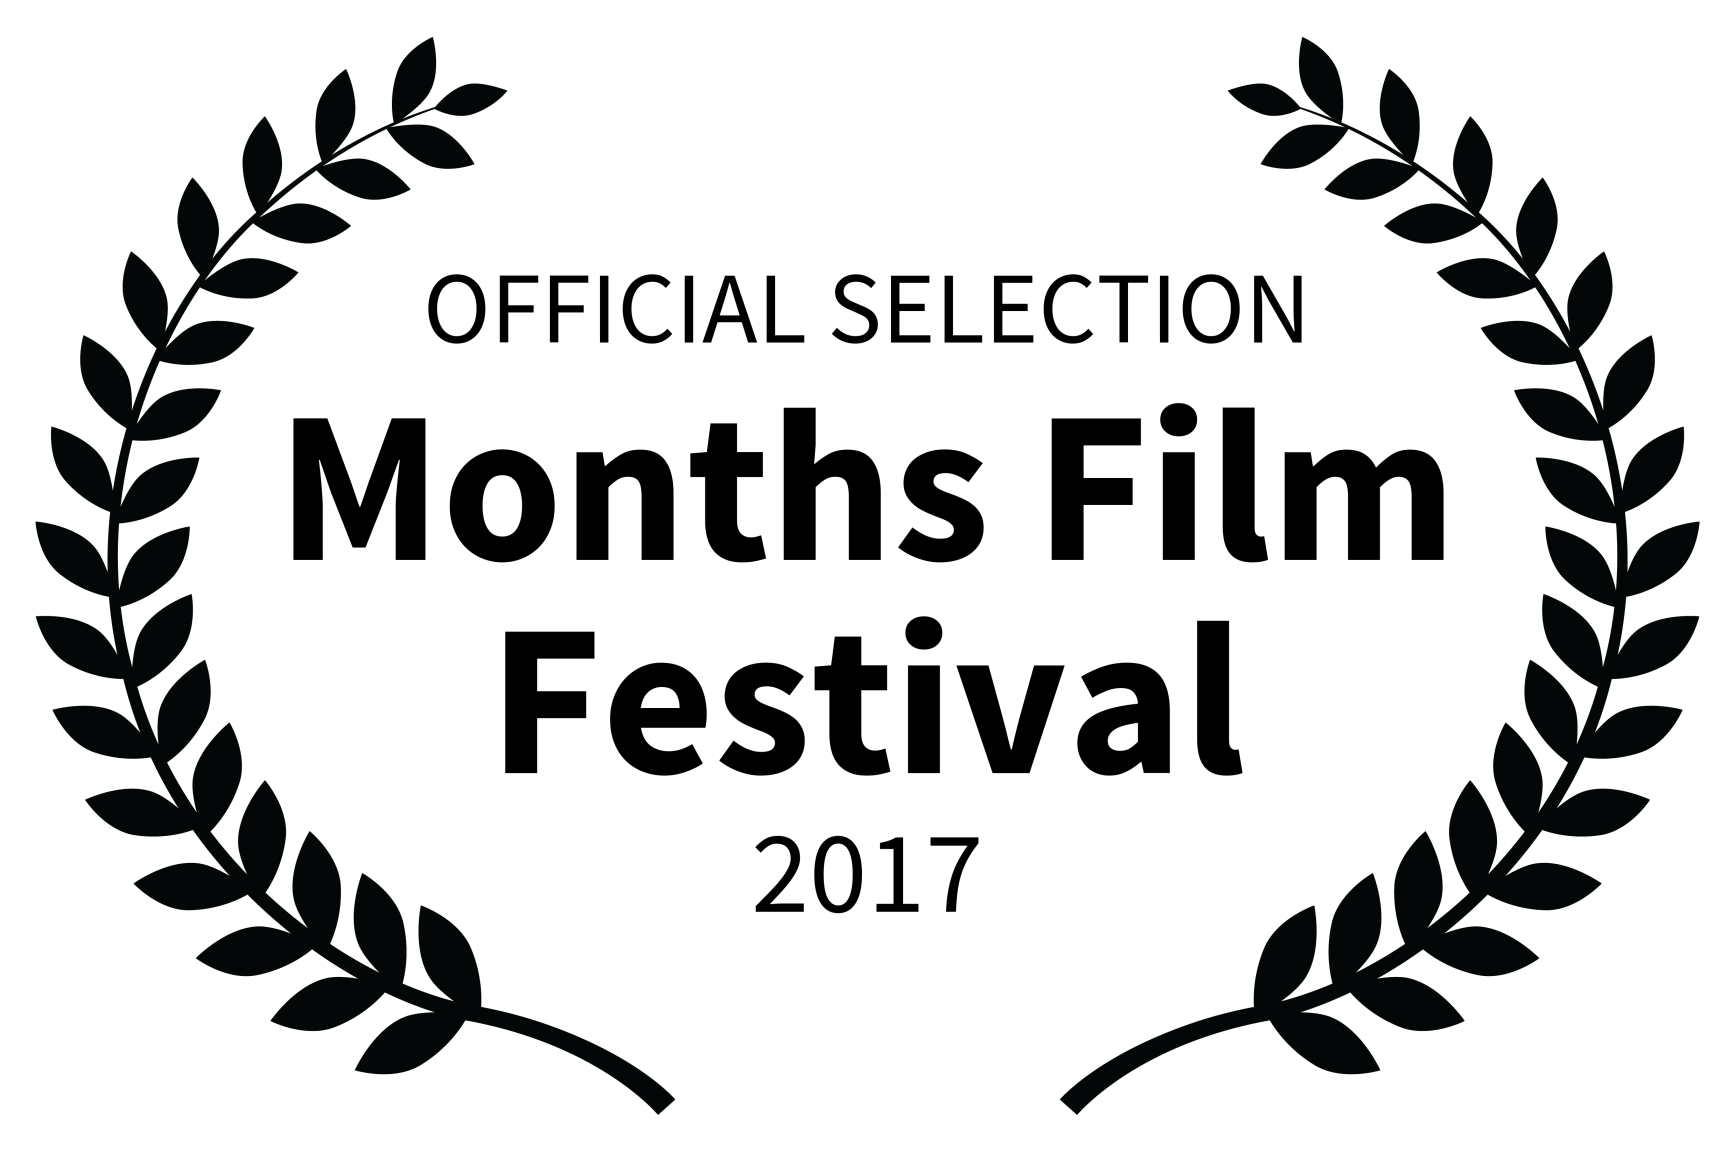 OFFICIAL SELECTION - Months Film Festival - 2017